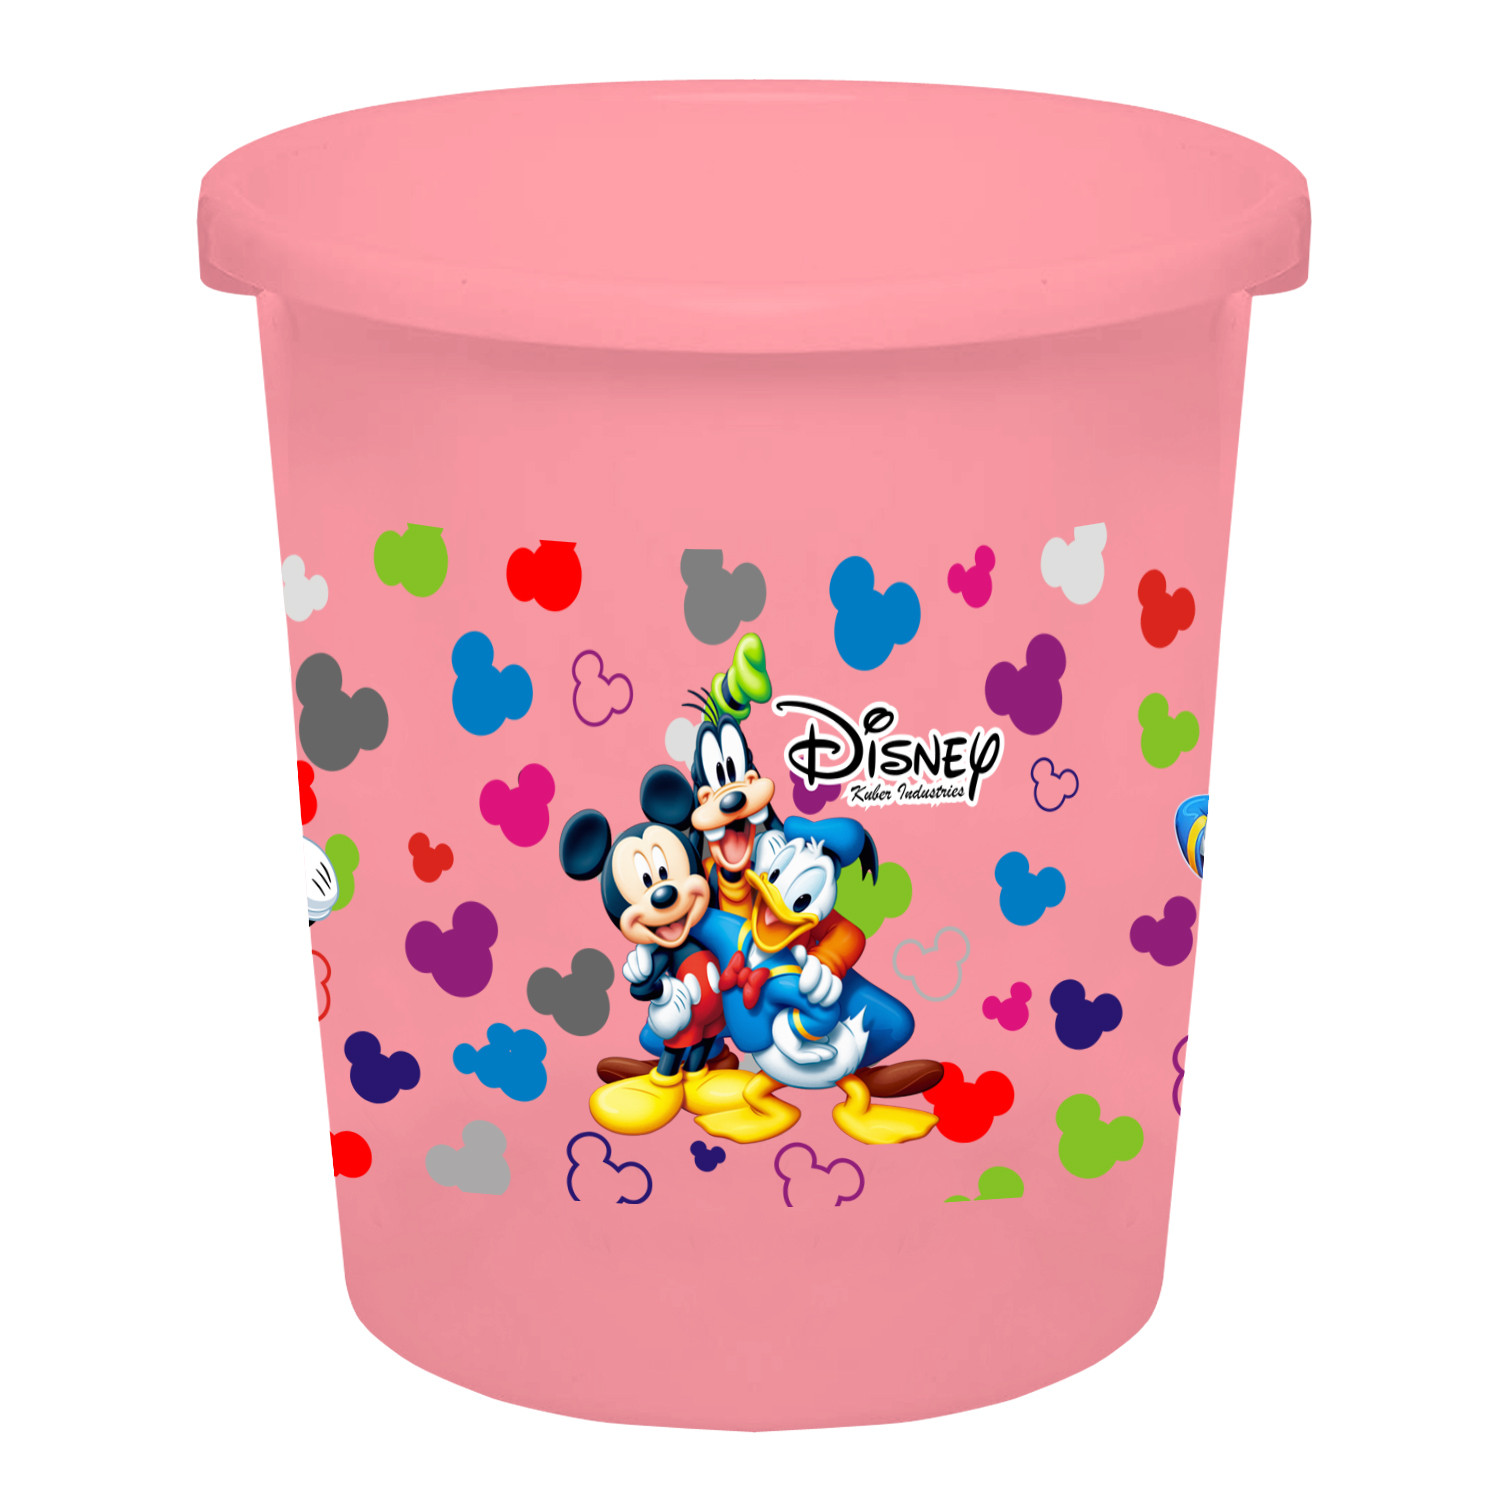 Kuber Industries Disney Team Mickey Print Plastic 3 Pieces Garbage Waste Dustbin/Recycling Bin for Home, Office, Factory, 5 Liters (Pink & Cream & Blue) -HS_35_KUBMART17365